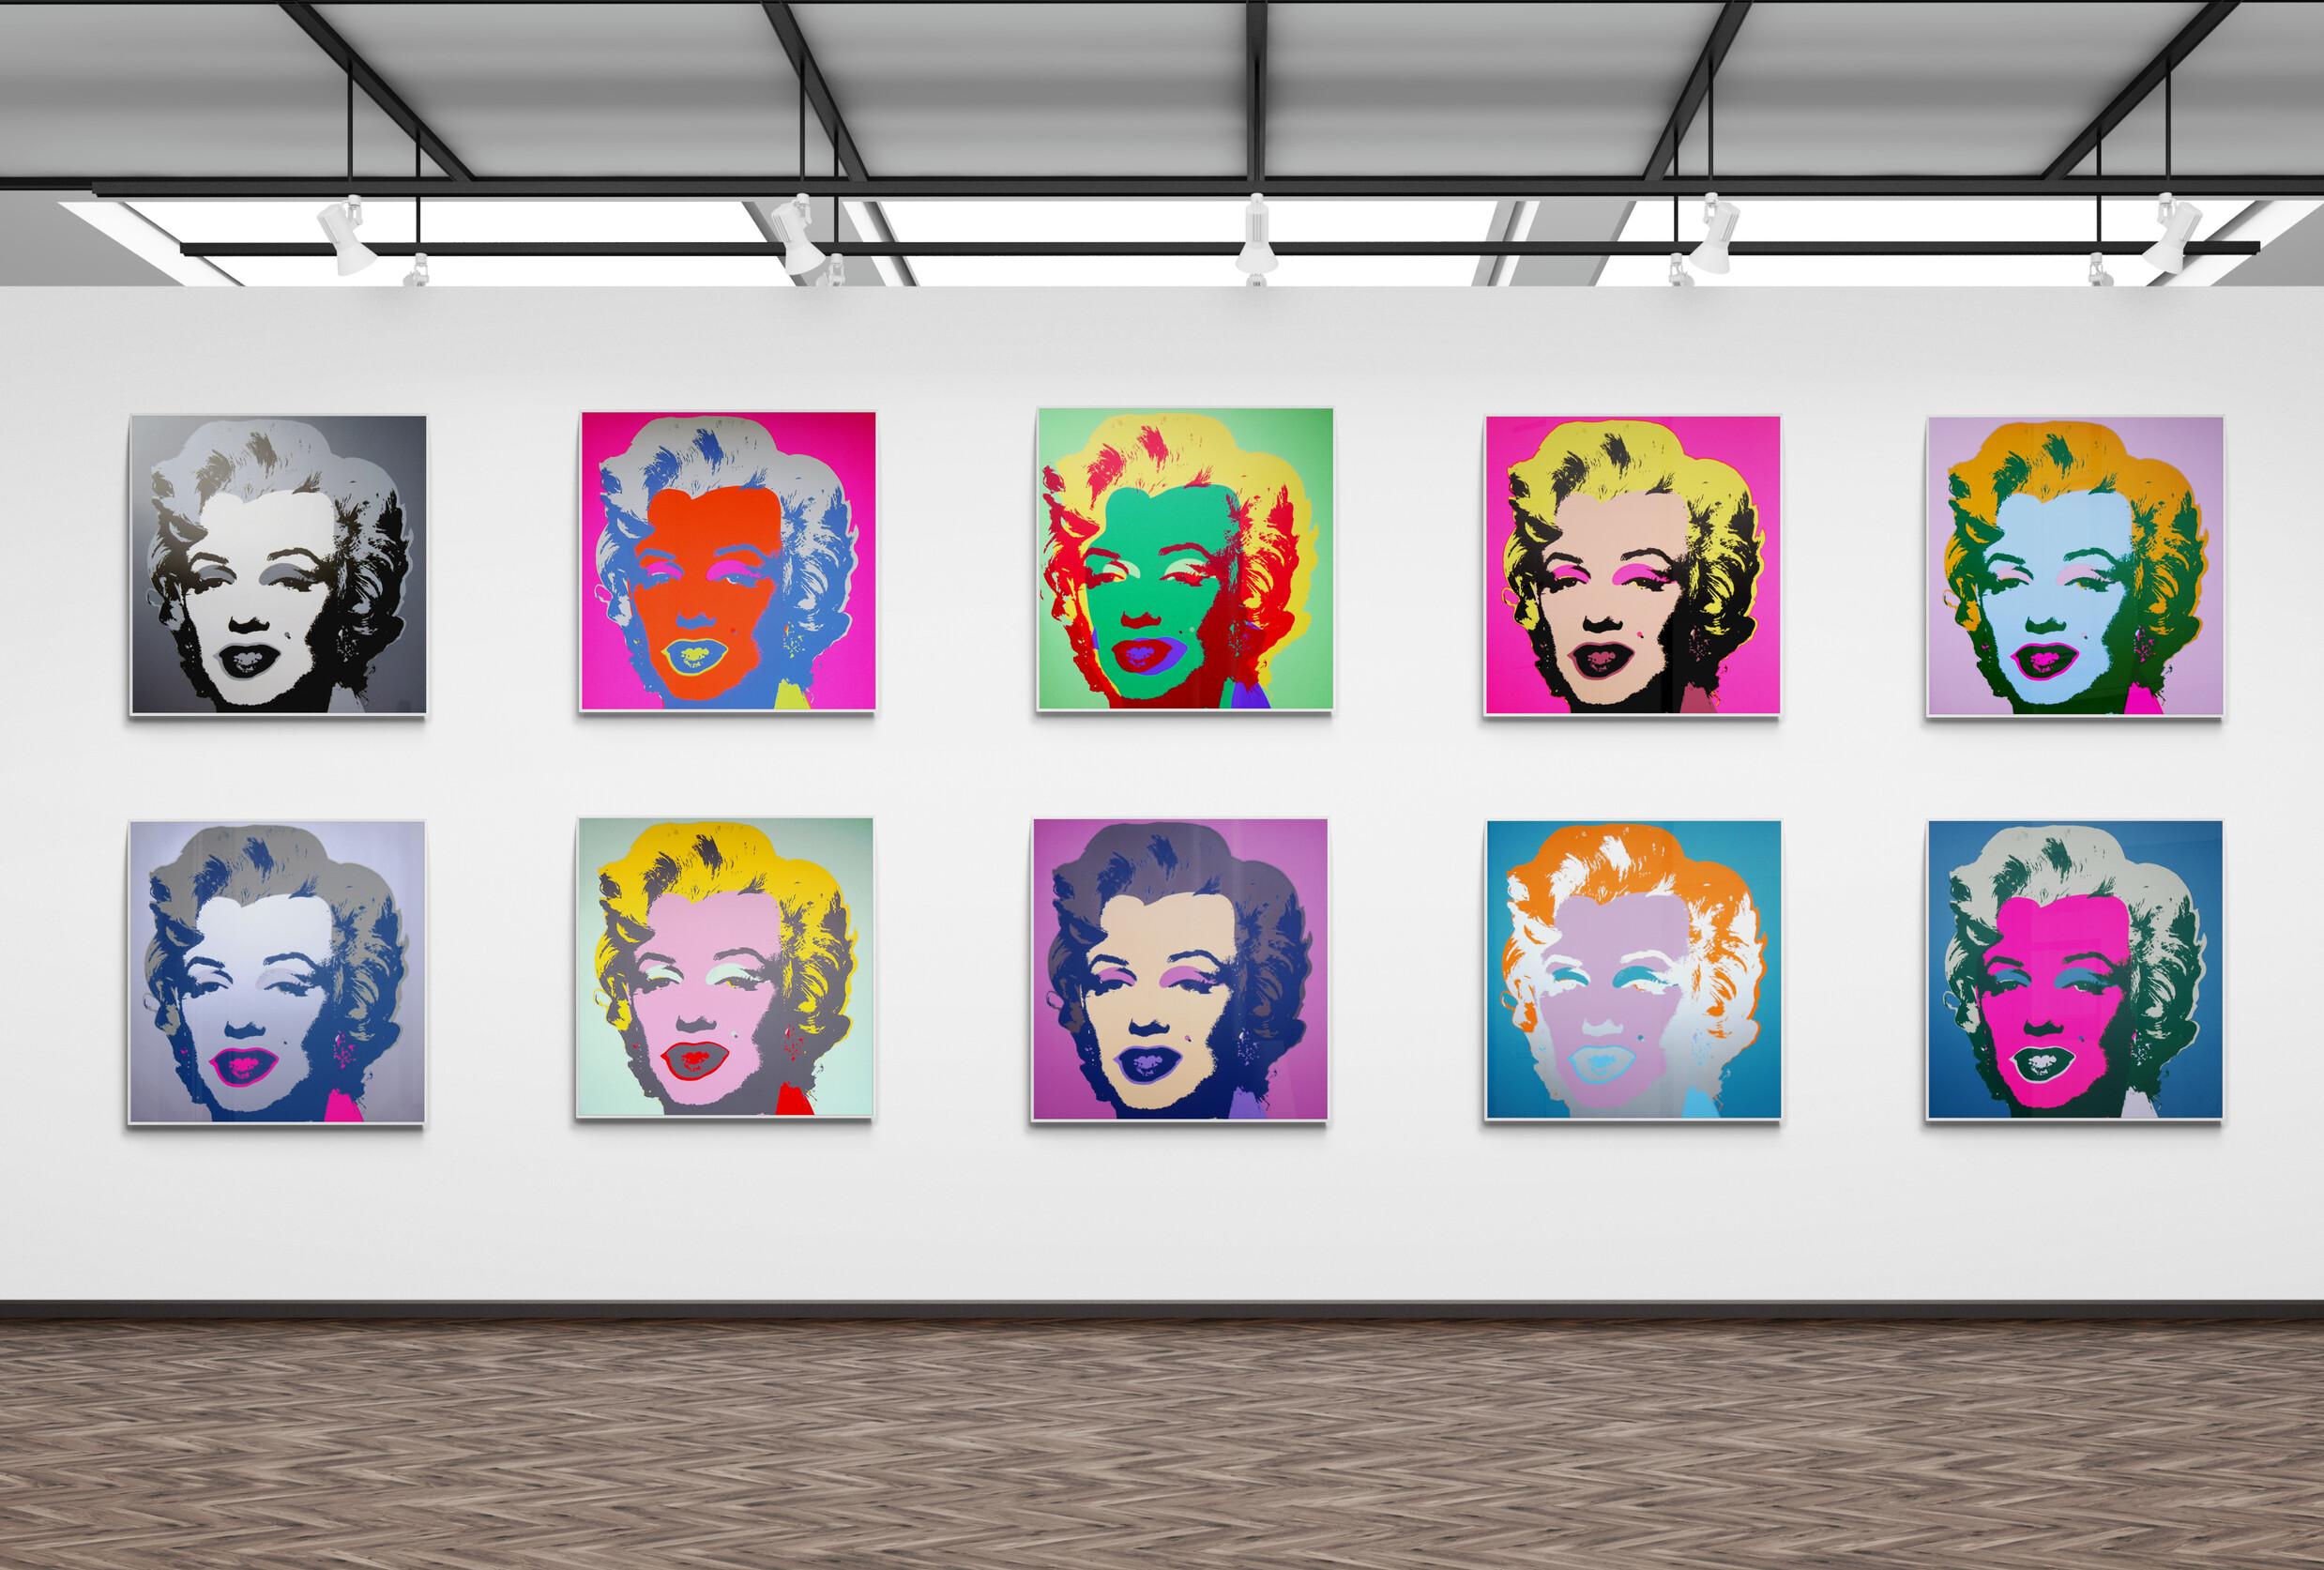 Andy Warhol (Sunday B. Morning) - MARILYN PORTFOLIO

Date of creation: After Andy Warhol
Medium: 10 screen prints on museum board paper
Edition: Not numbered
Size: 36 x 36 in - 91.5 x 91.5 cm (each)
Condition: In mint conditions, brand new and never